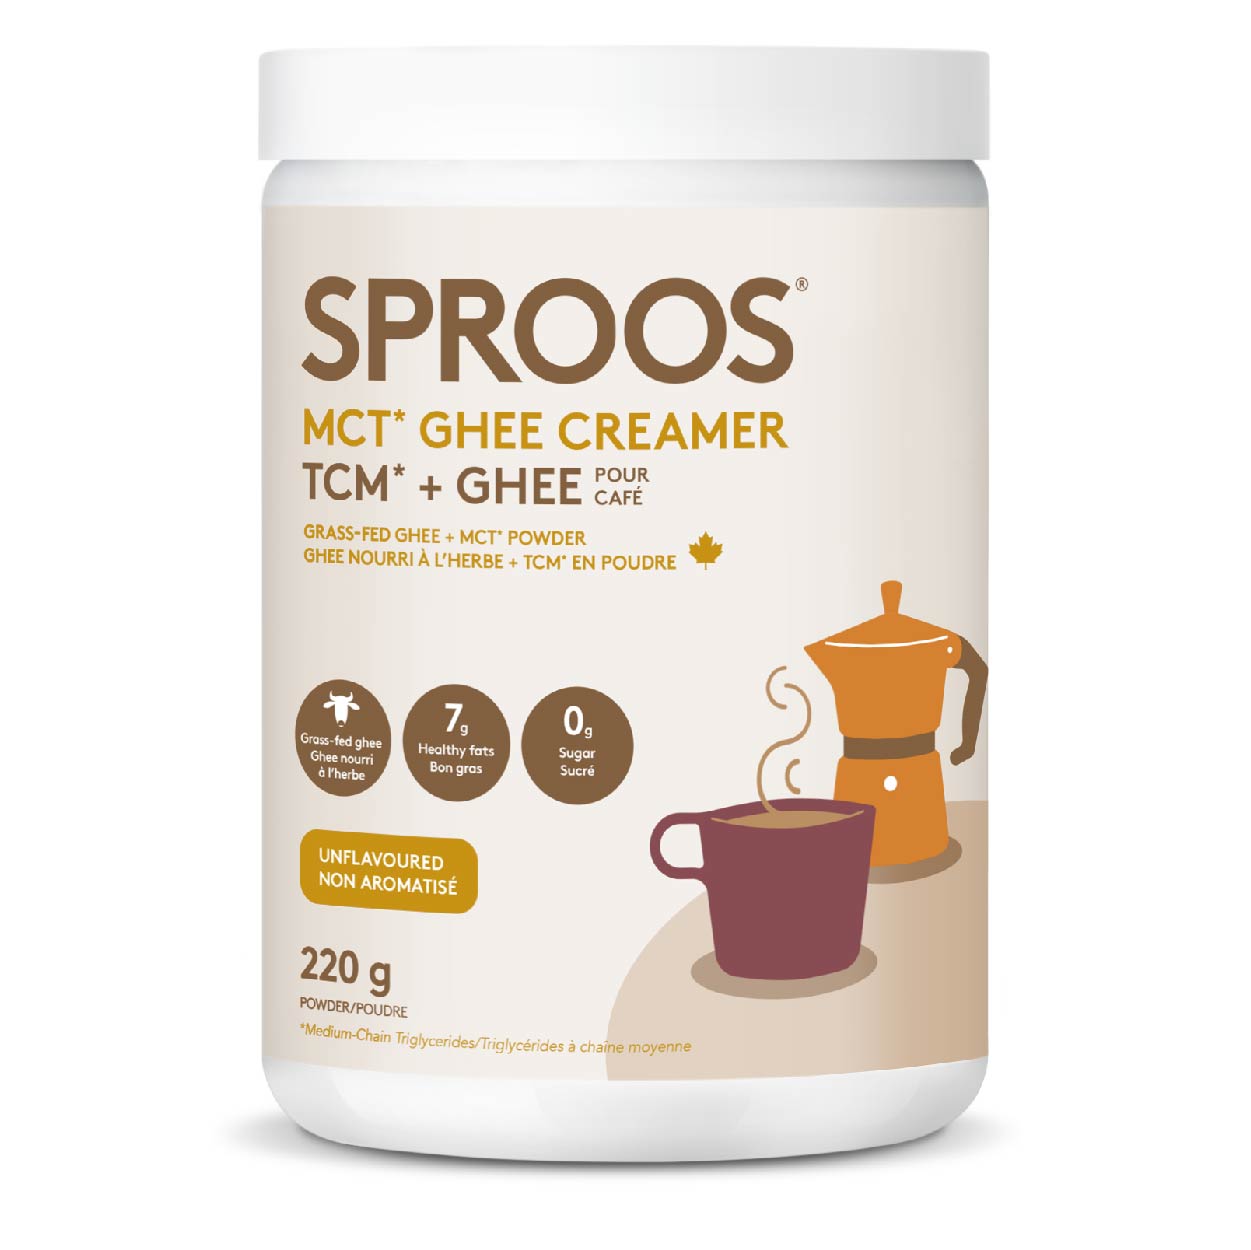 Sproos MCT GHEE Creamer for coffee